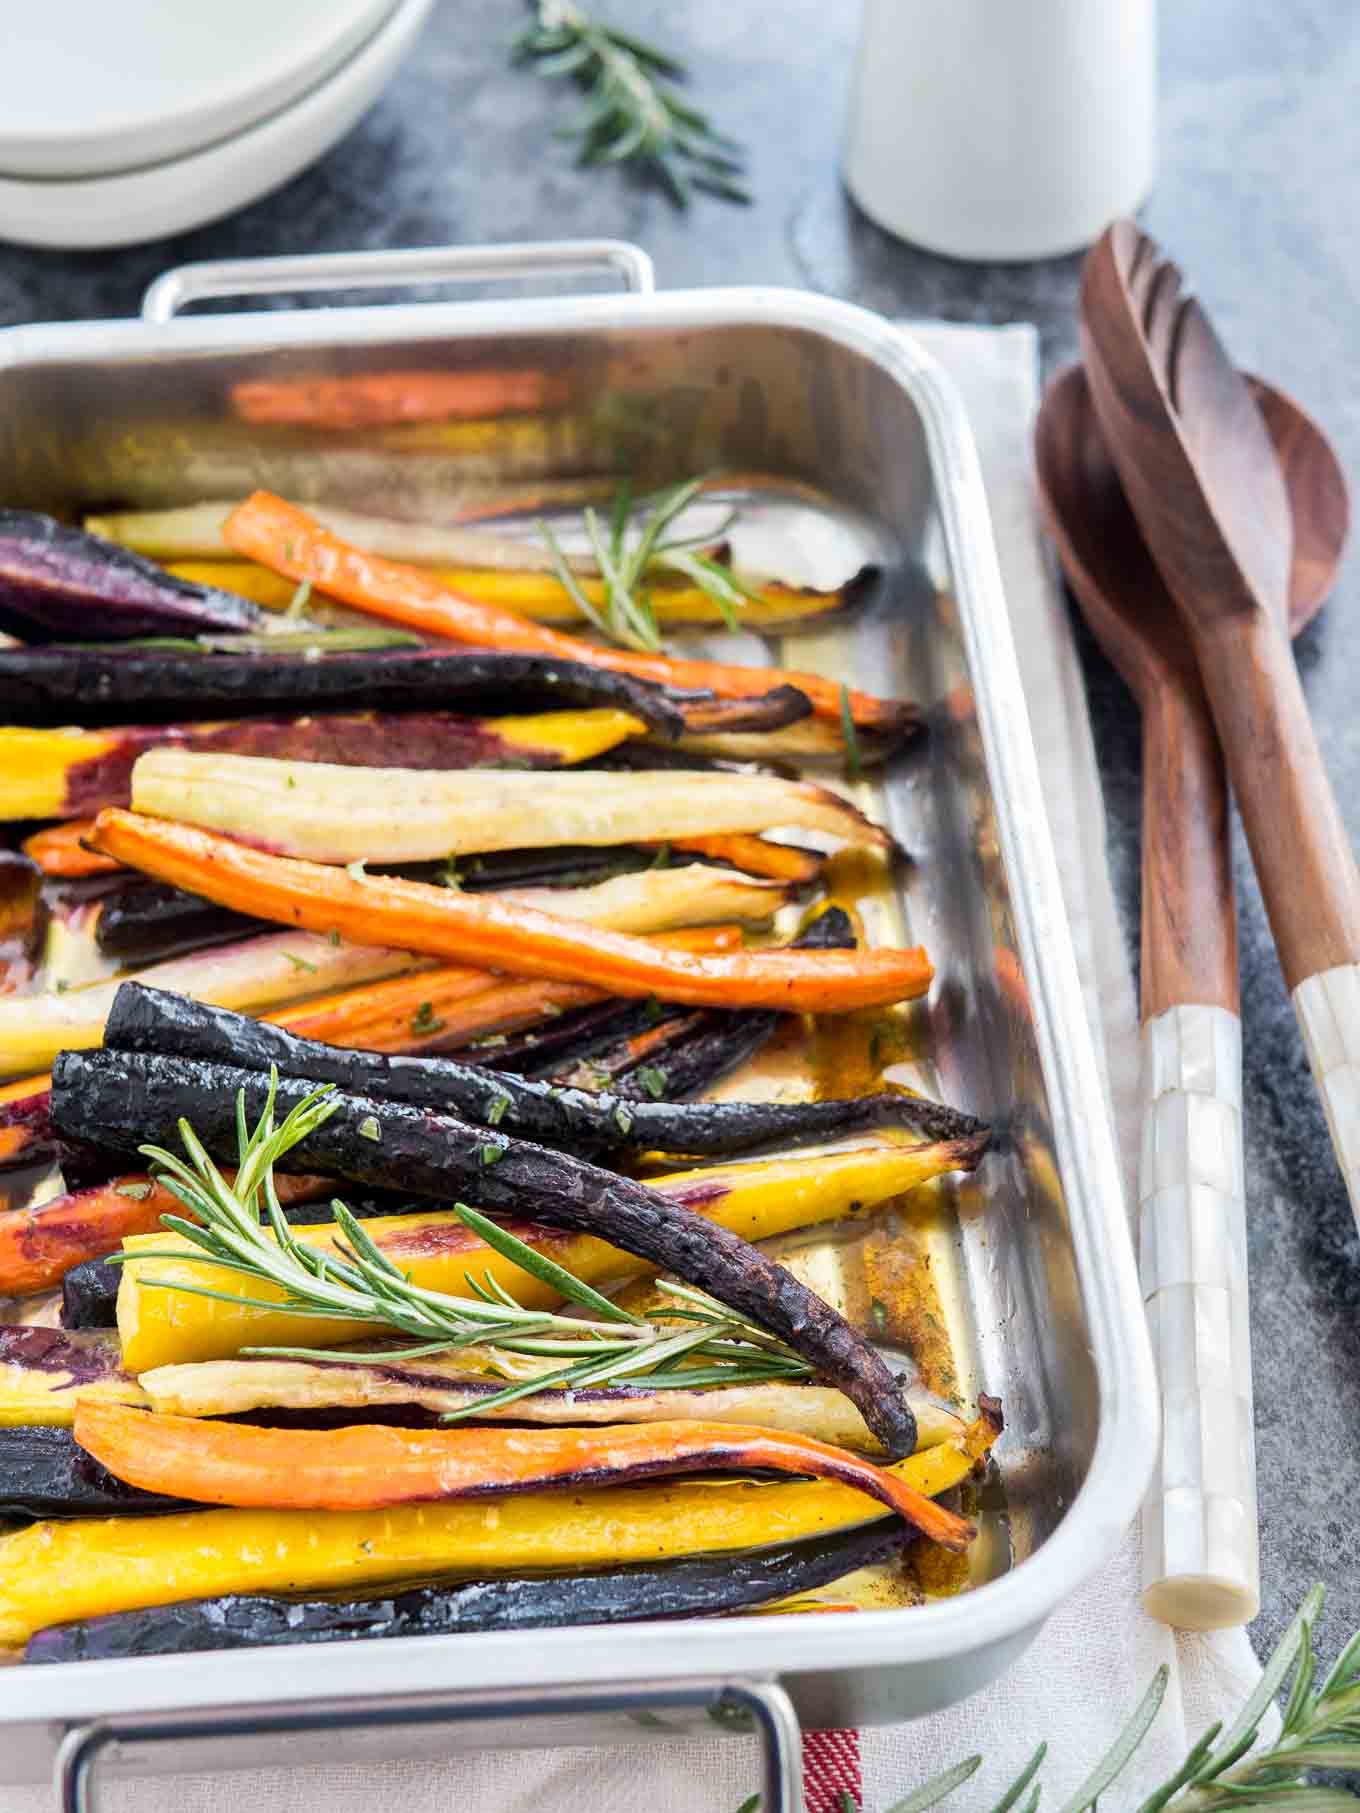 A roasting pan with roasted rainbow carrots garnished with sprigs of rosemary on a white dishtowel with a red stripe. There is a stack of plates in the background and salad tongs next to it.